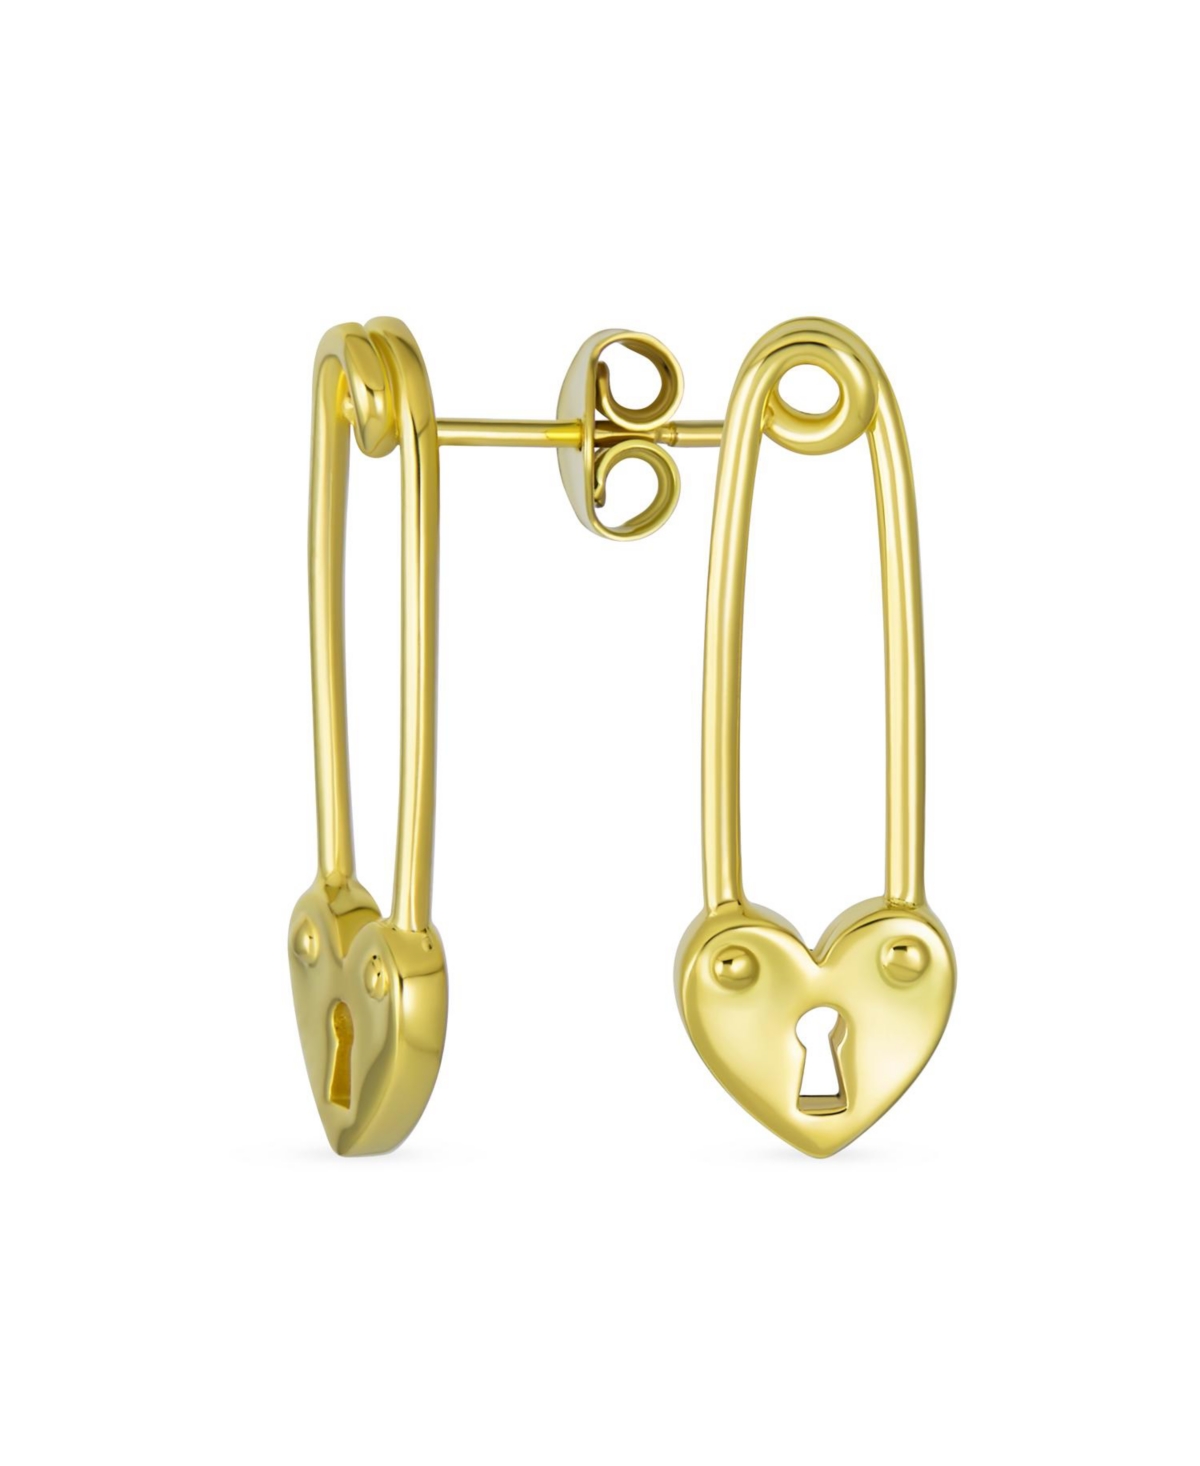 Inspirational Symbol Paper Clip Love Lock Drop Sweet Heart Safety Pin Earrings Stud For Women Teen 14K Yellow Gold Plated .925 Sterling Silver - Gold-